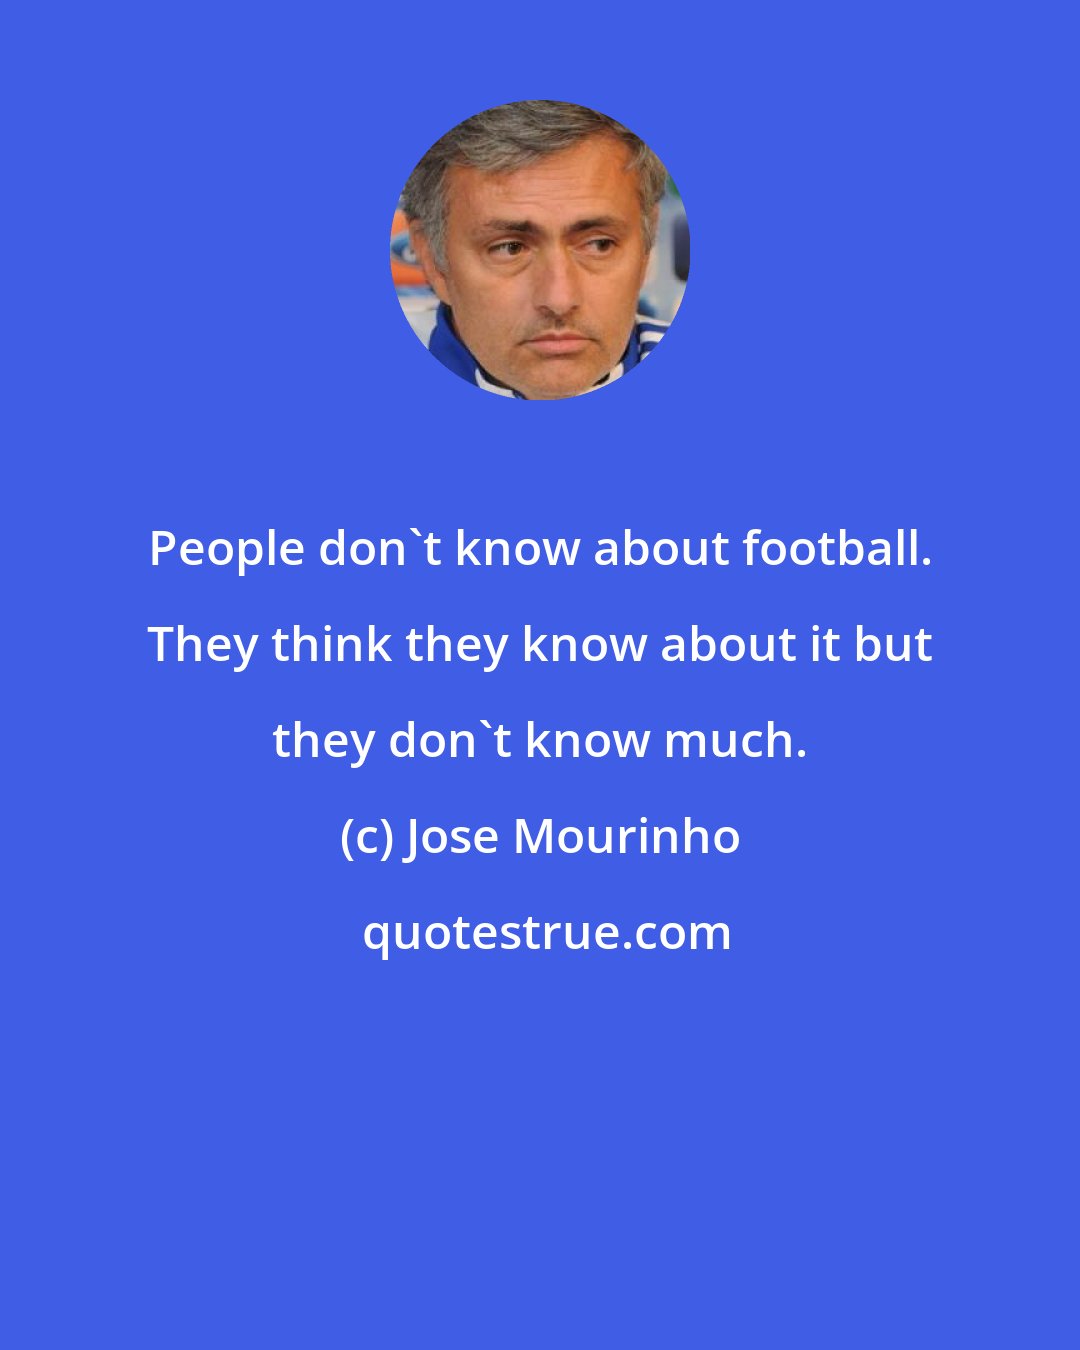 Jose Mourinho: People don't know about football. They think they know about it but they don't know much.